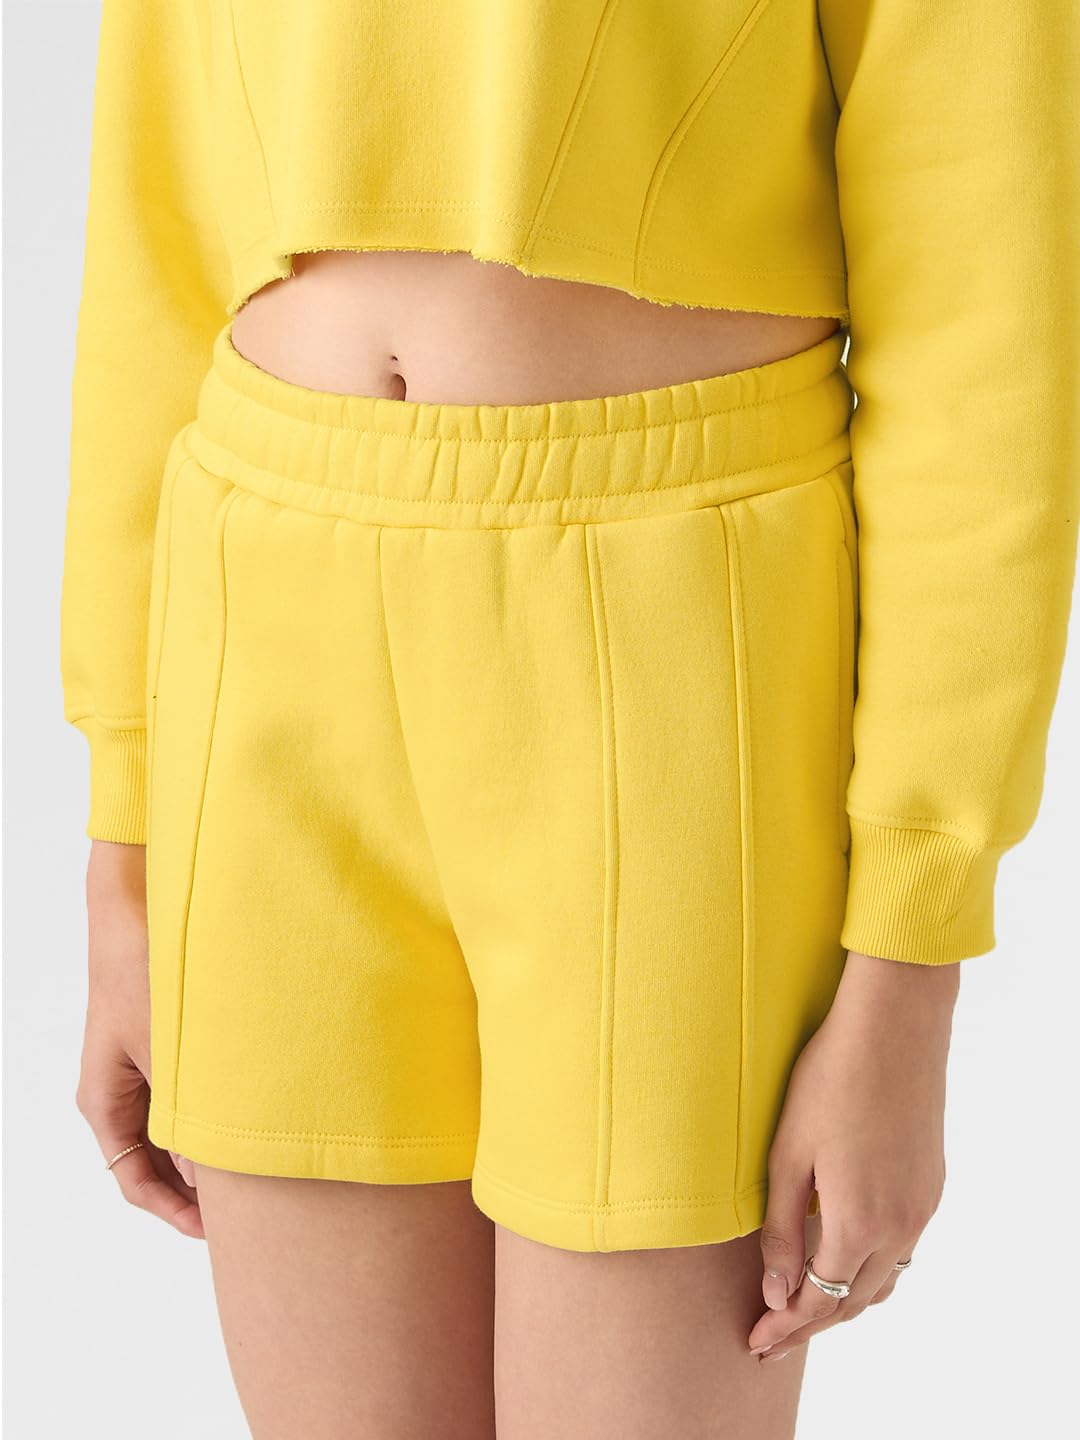 The Souled Store Amber Women Regular Fit Solid Yellow Color Cotton and Polyester Lounge Shorts SweatShorts Women's Sweat Shorts Athletic Lounge Gym Running Workout French Terry Cotton Drawstring